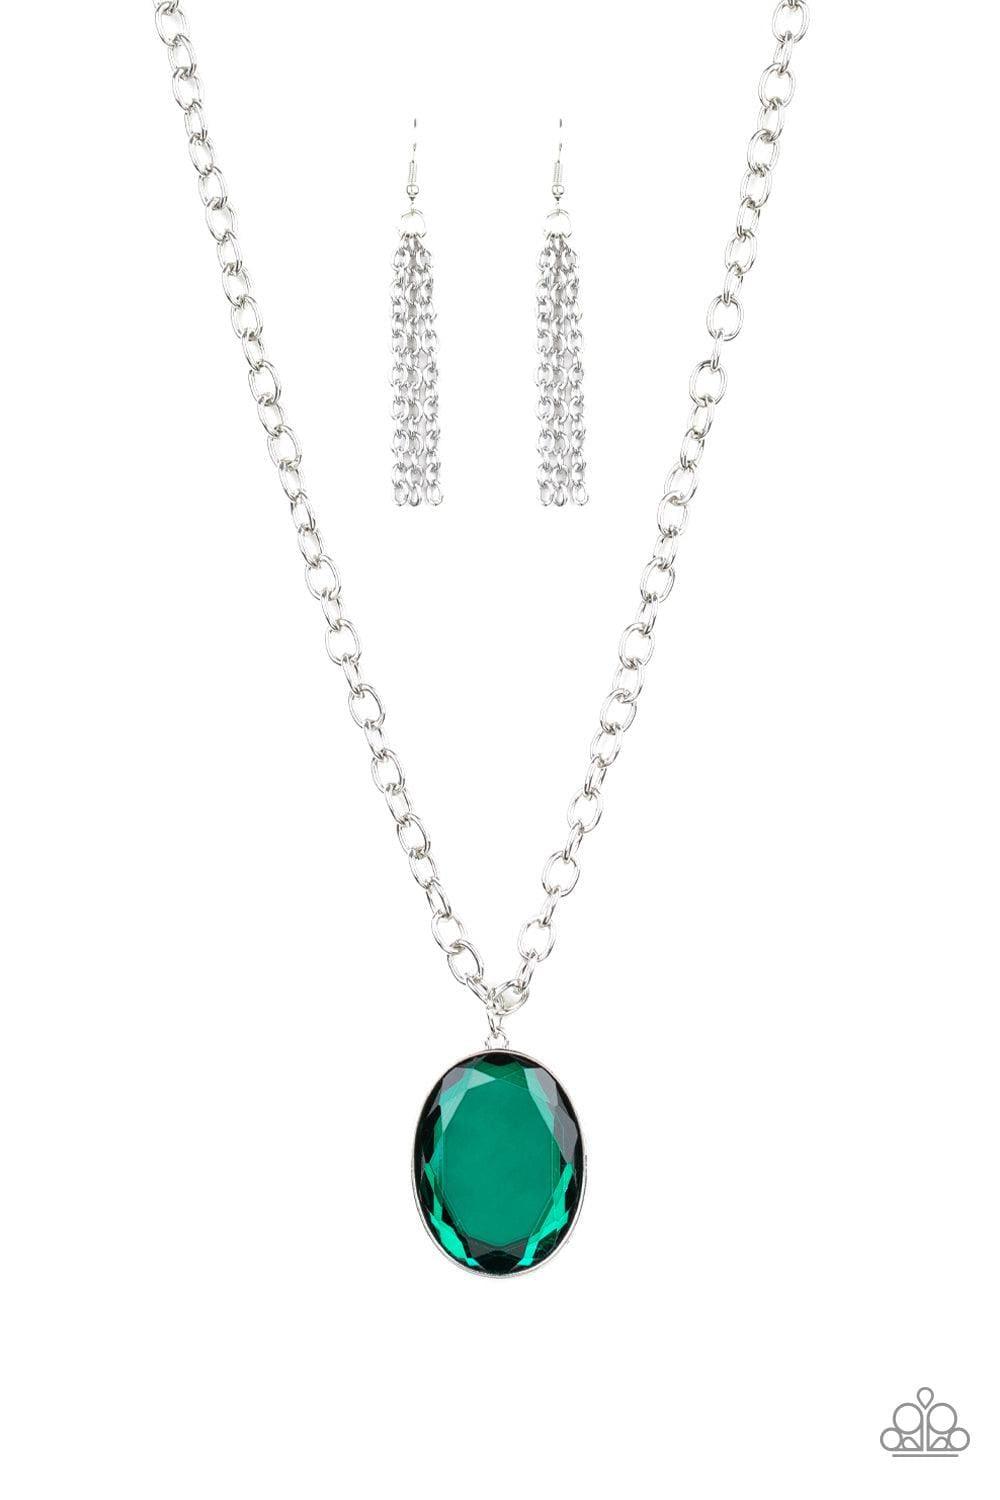 Paparazzi Accessories - Light As Heir - Green Necklace - Bling by JessieK